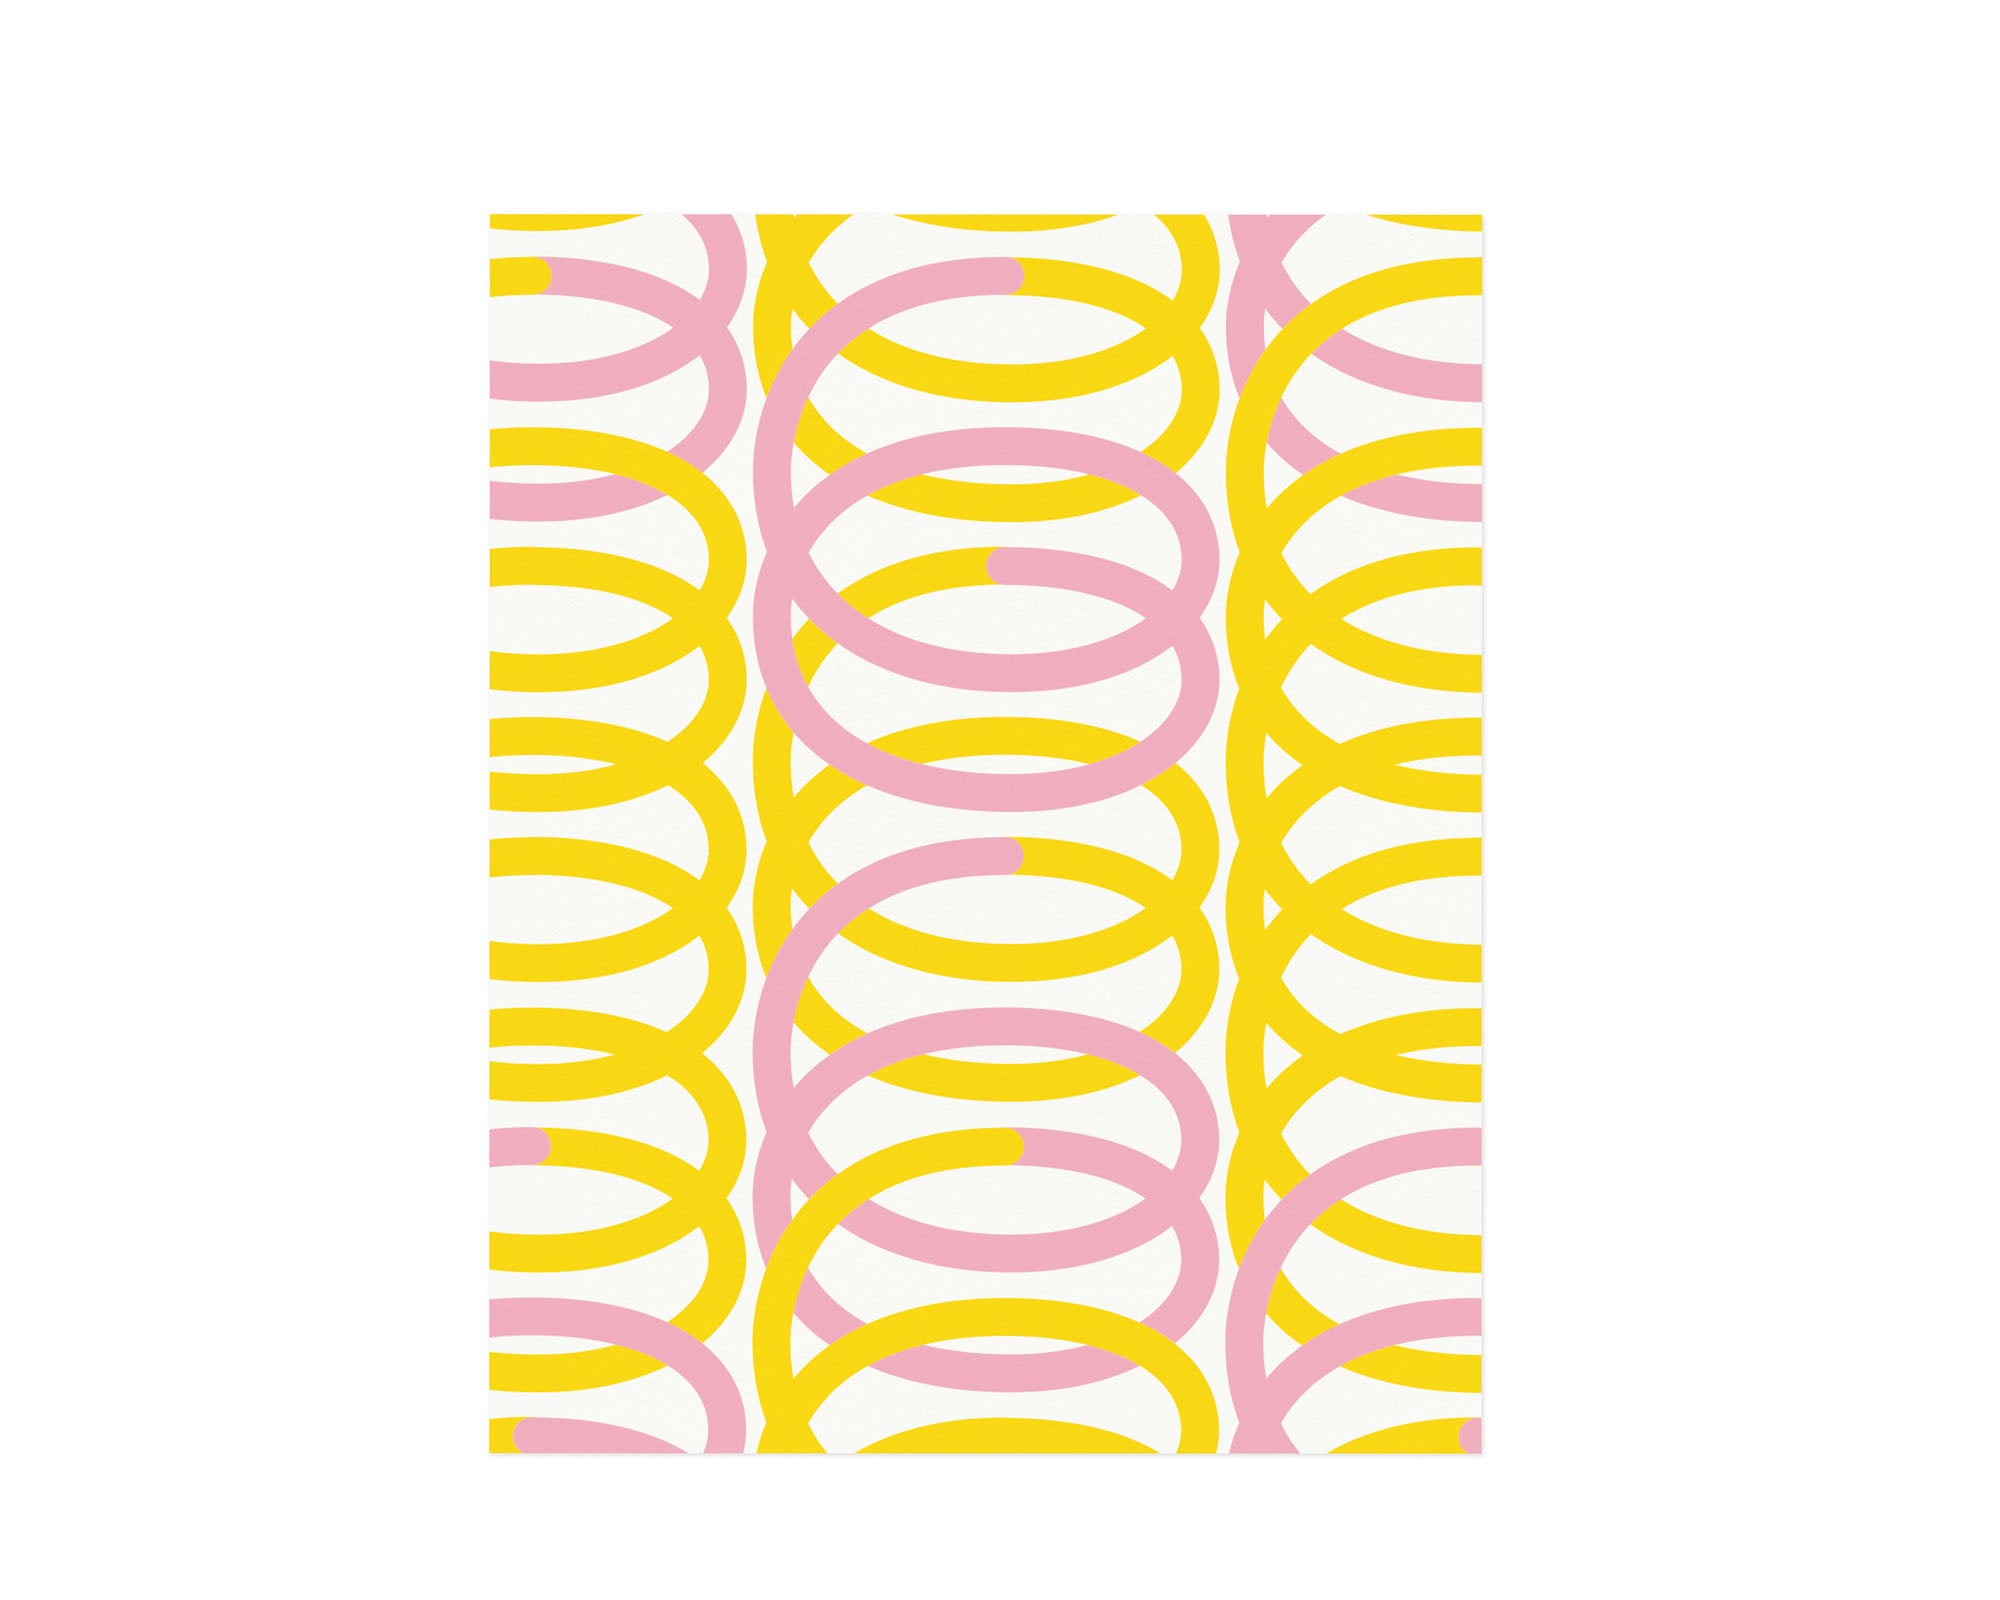 "Spiro" pink and yellow graphic geometric squiggle composition archival giclée art print. Made in USA by My Darlin' @mydarlin_bk